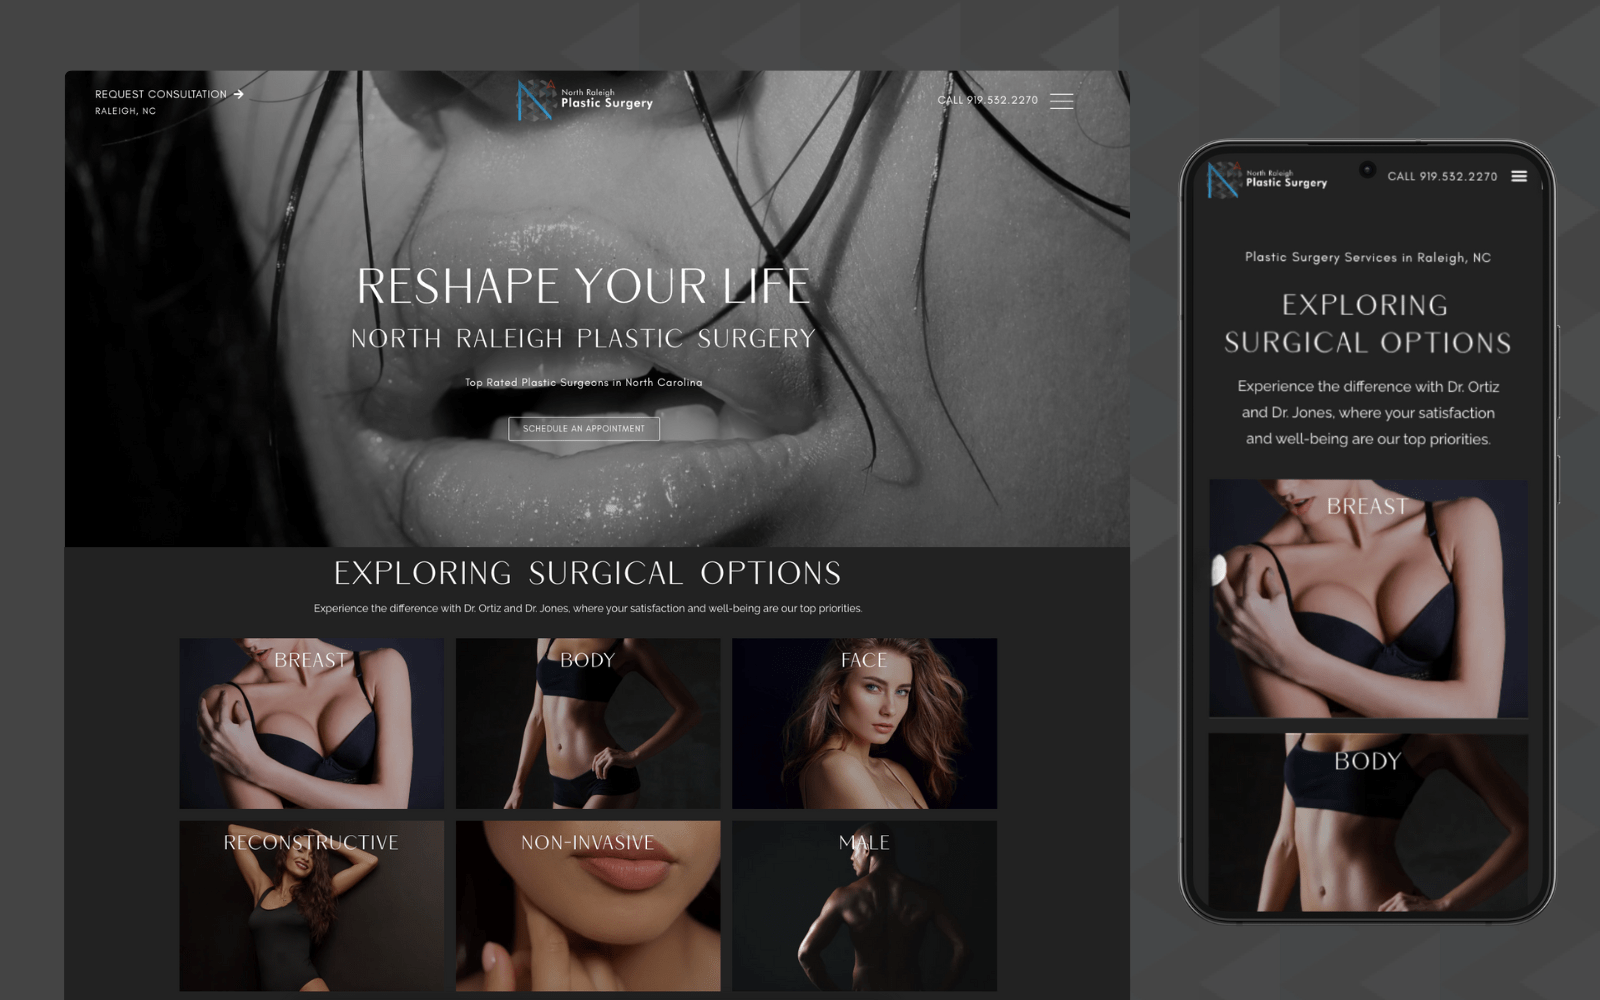 Website design for a plastic surgery: Elegant and alluring women showcased on a visually appealing website.